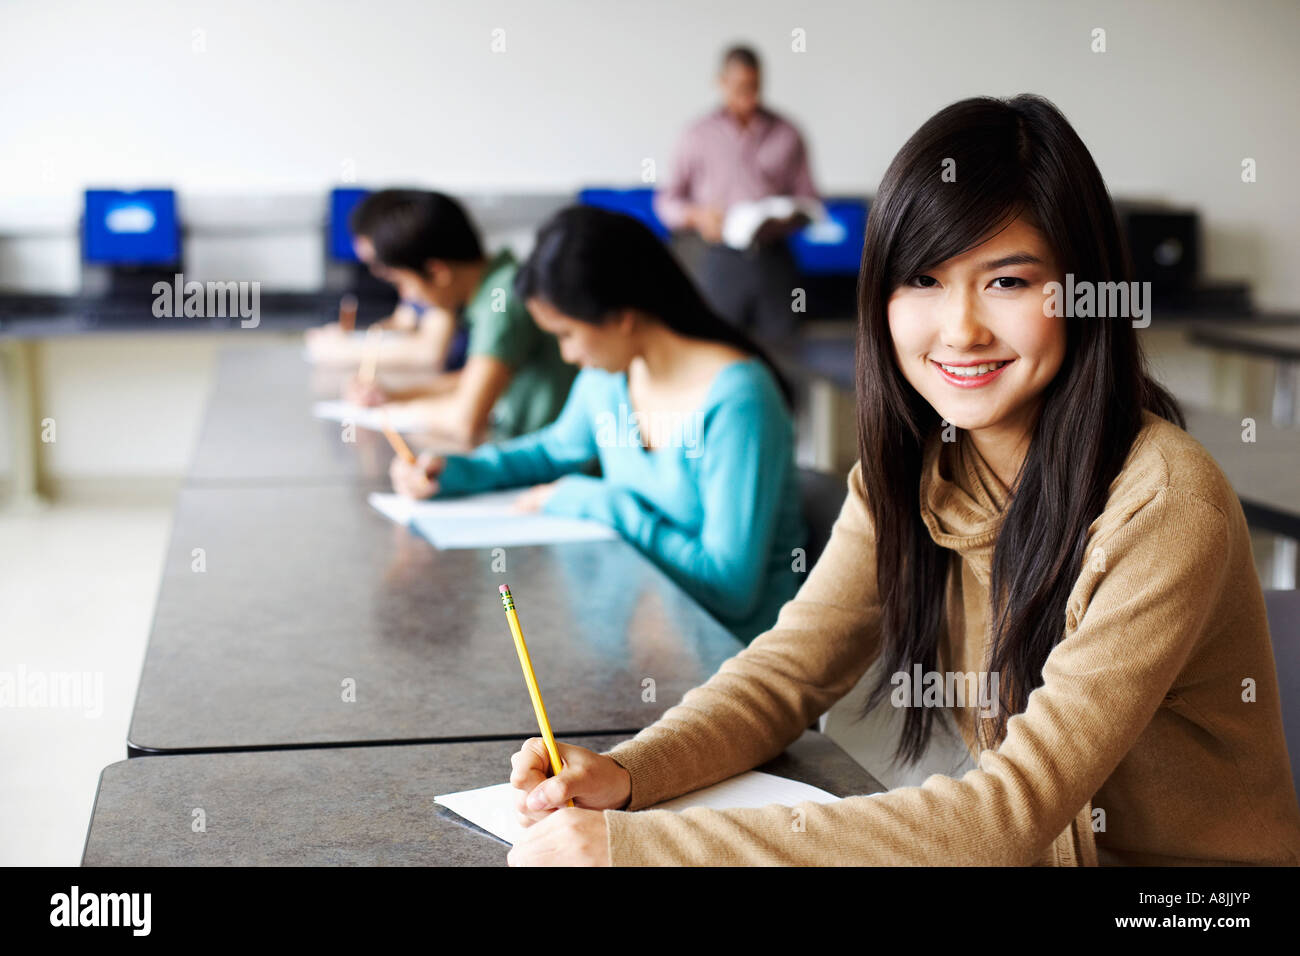 Portrait of a young woman giving exams in a classroom and smiling Stock Photo